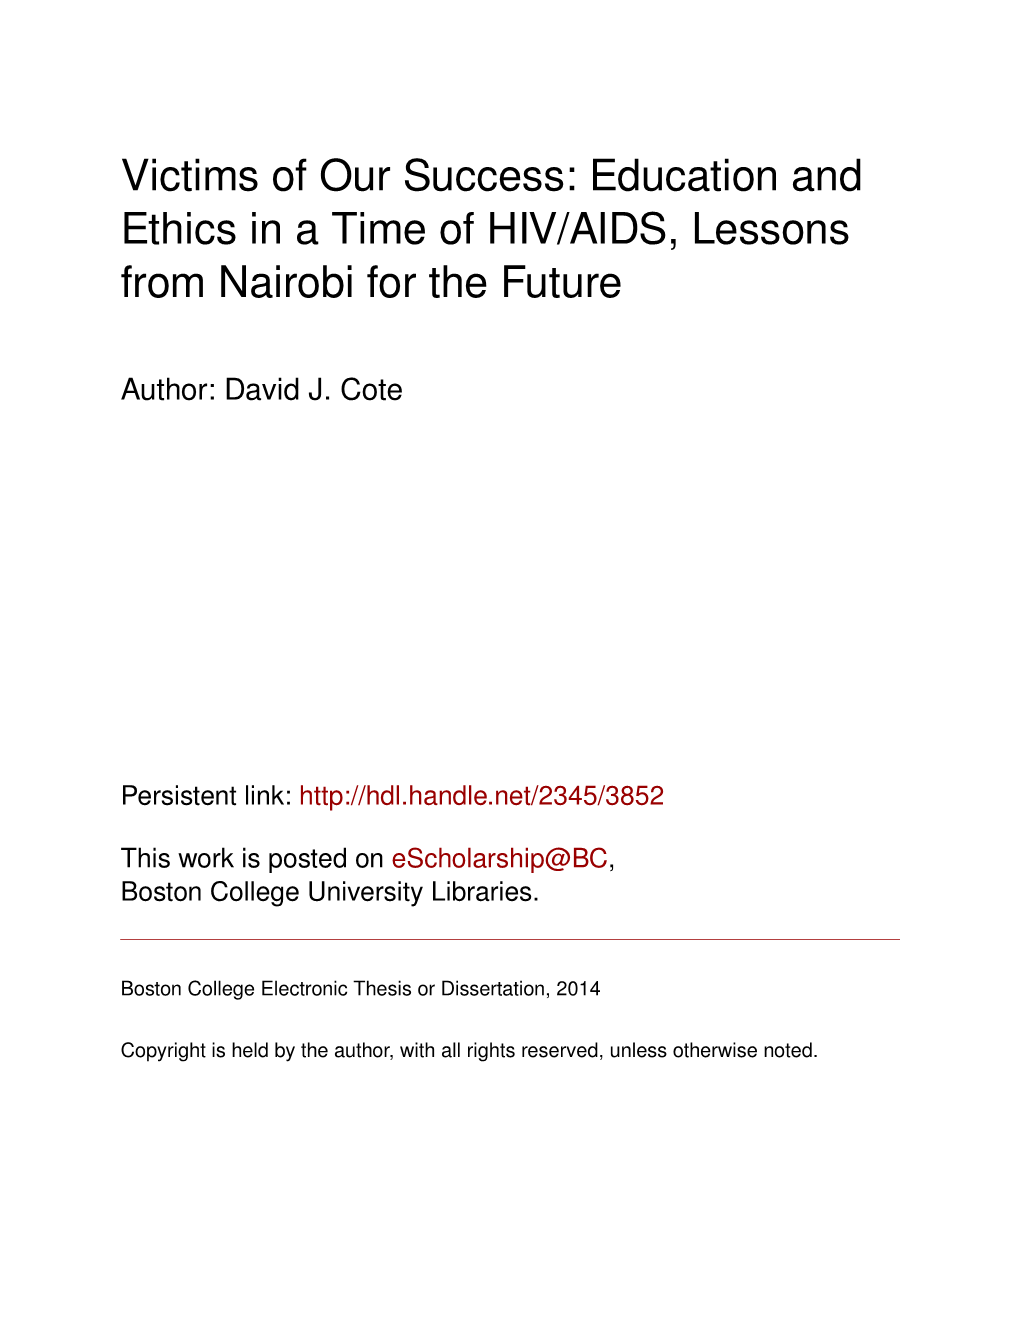 Victims of Our Success: Education and Ethics in a Time of HIV/AIDS, Lessons from Nairobi for the Future